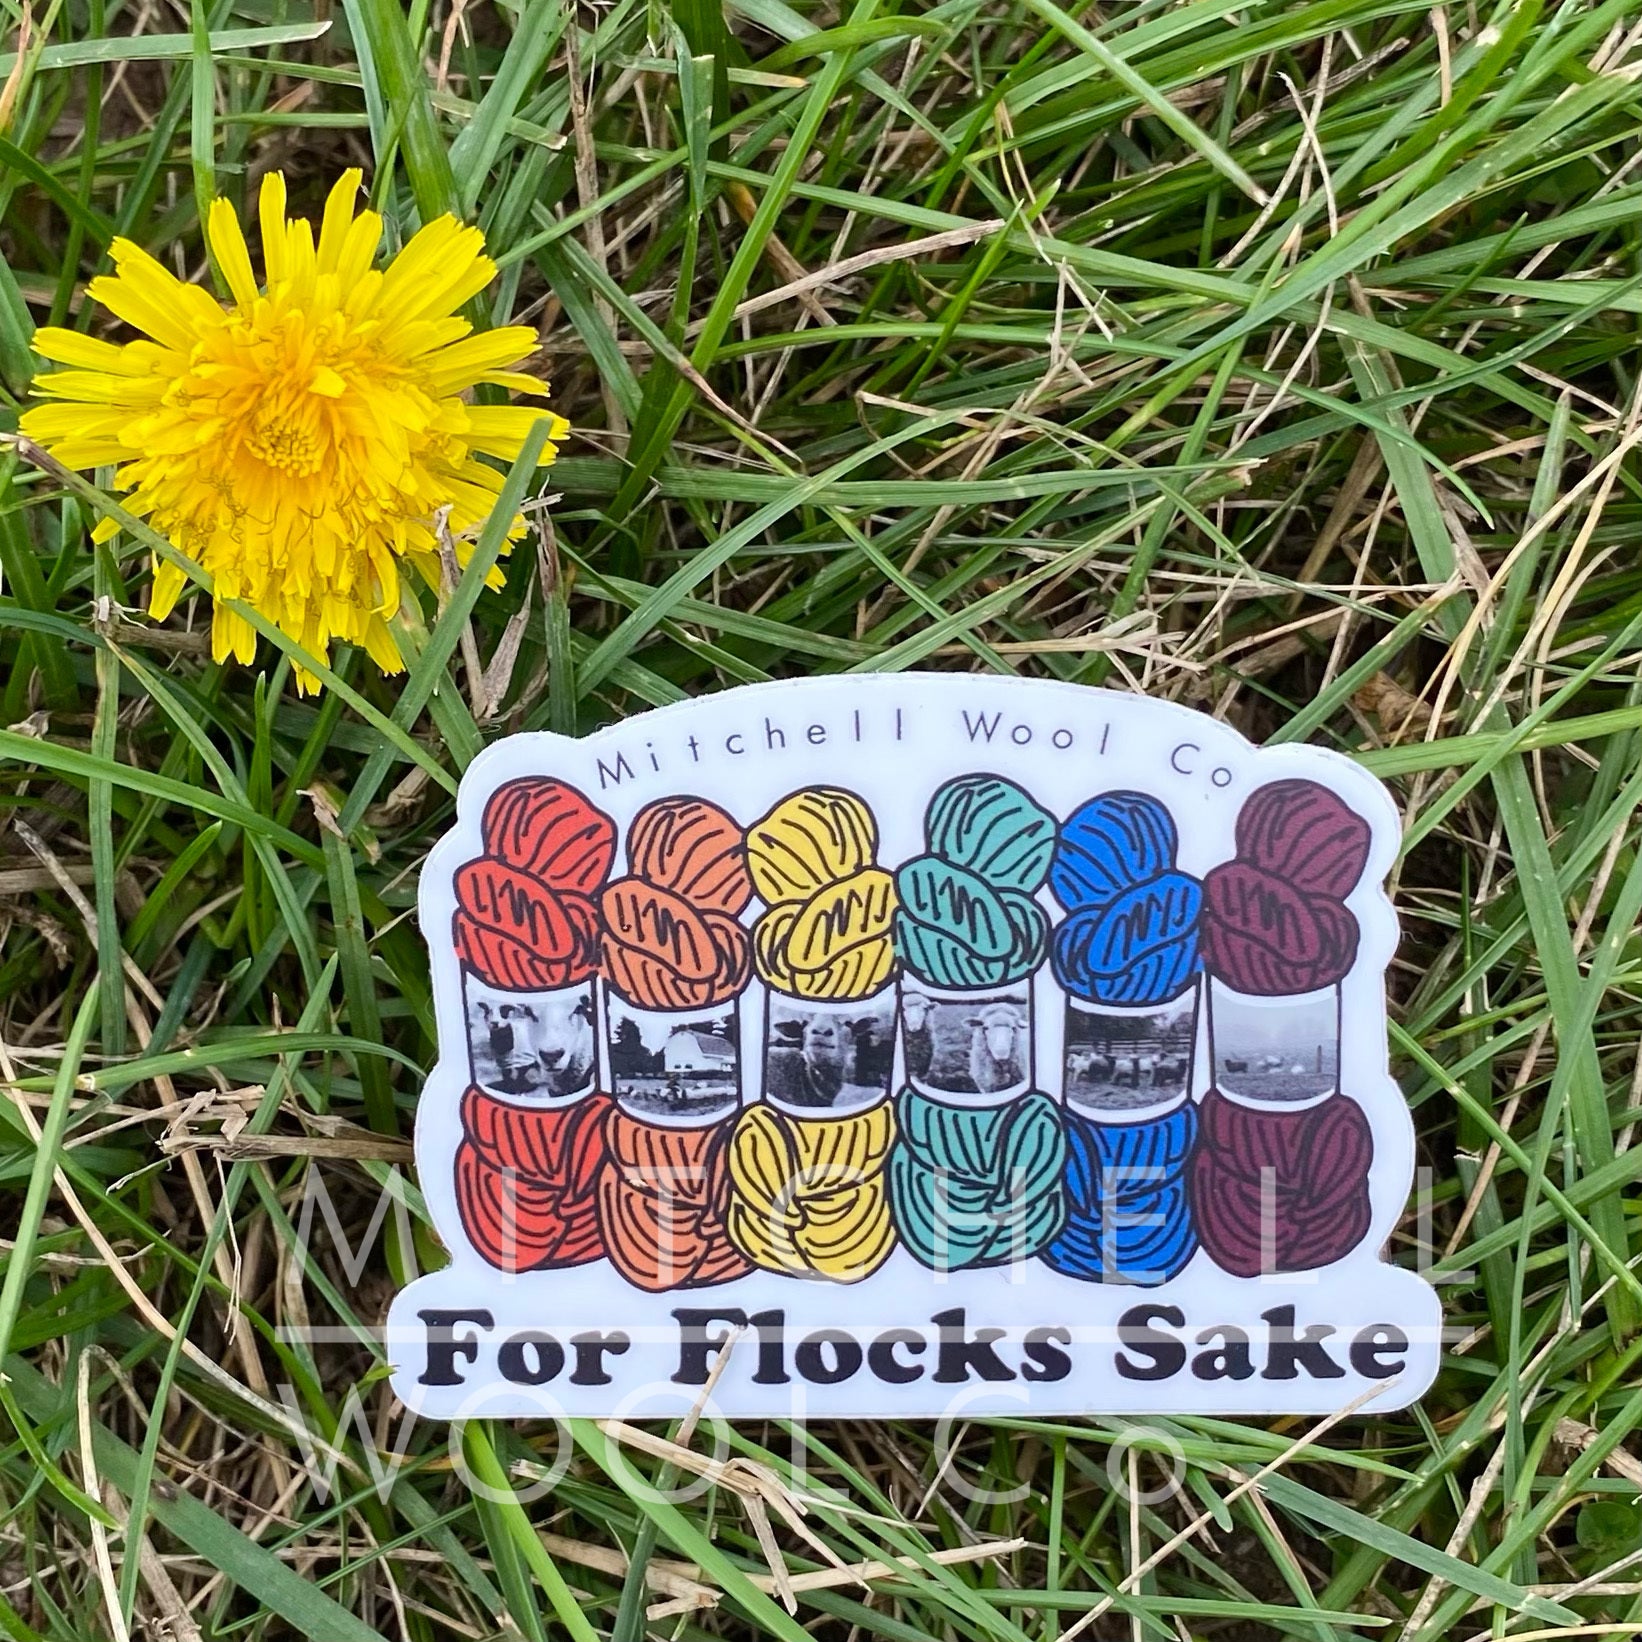 "for flocks sake" pride month sticker, with a row of rainbow yarn skeins, that measures 2.76 x 2"